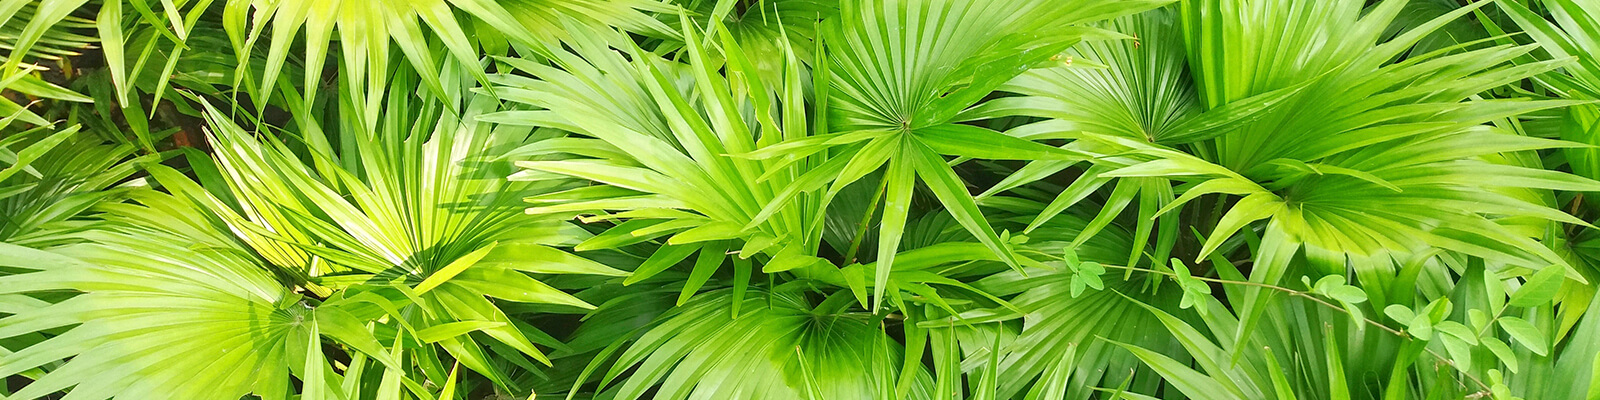 Saw Palmetto Benefits Side Effects Dosage Ben S